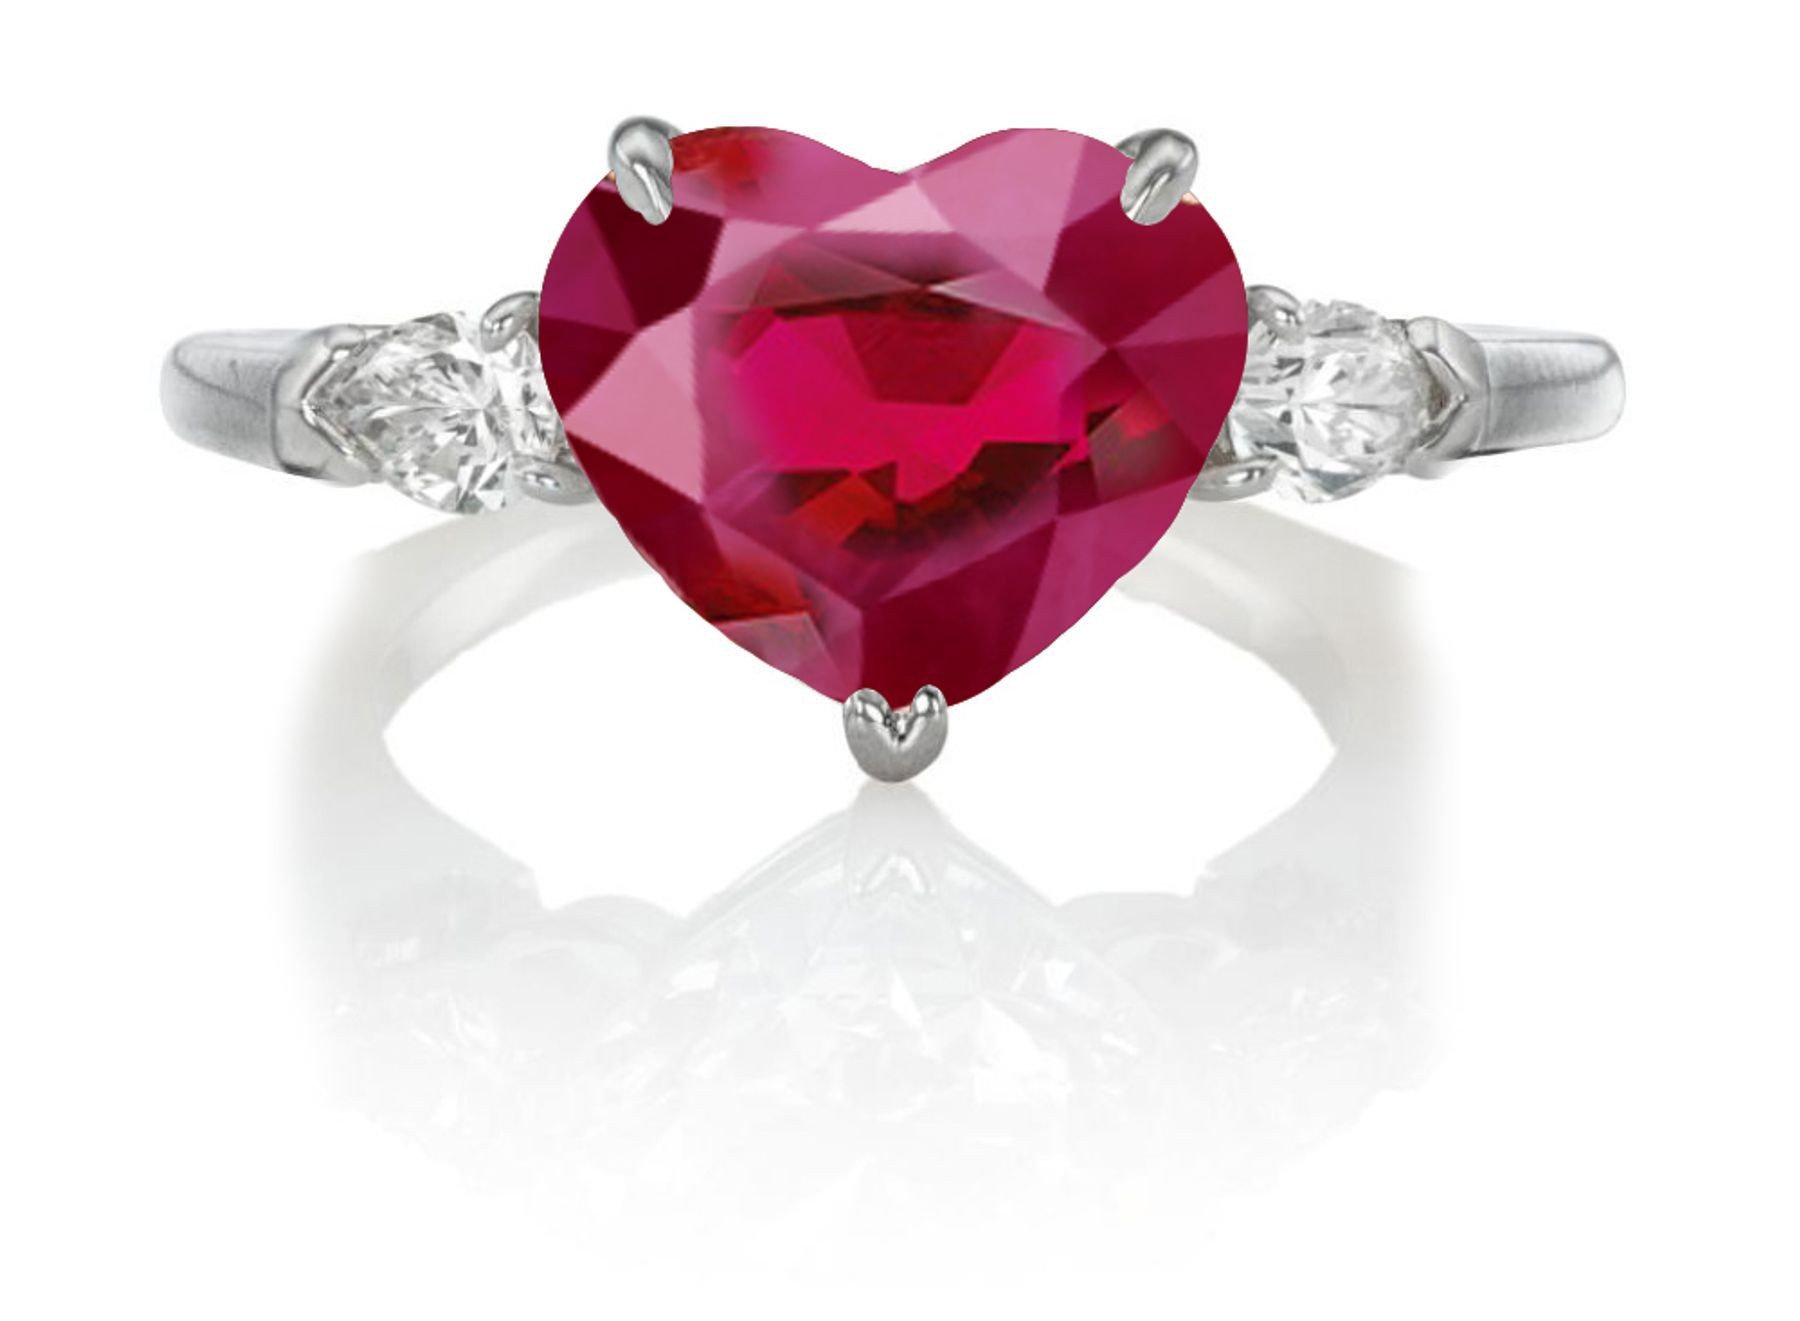 Made to Order Three Stone Heart Shaped Ruby & Pears Diamond Designer Rings